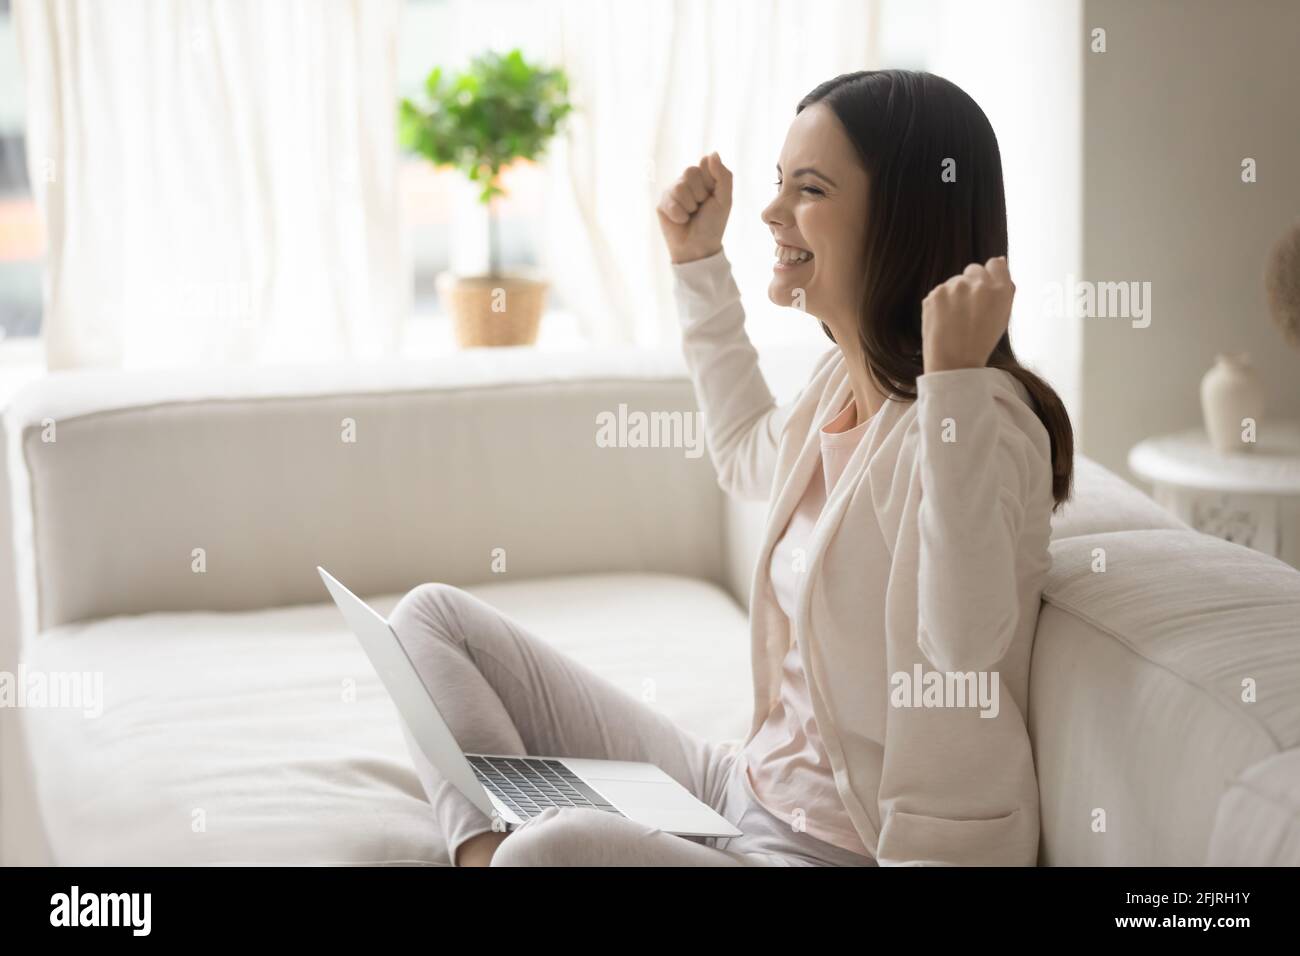 Happy excited millennial woman with laptop getting good news Stock Photo